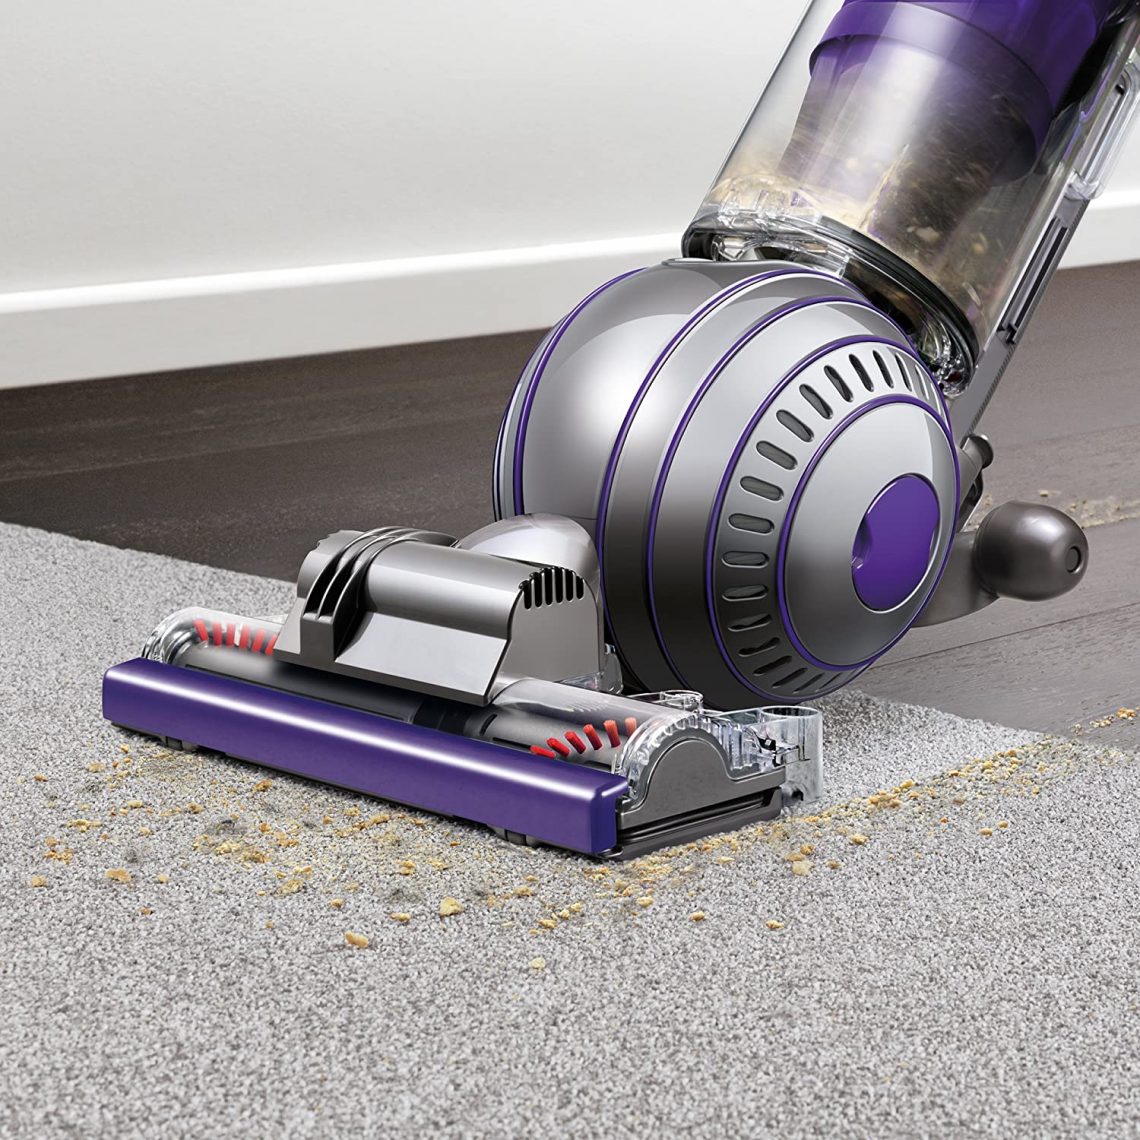 Dyson vacuum is not picking up pets hair from the carpet